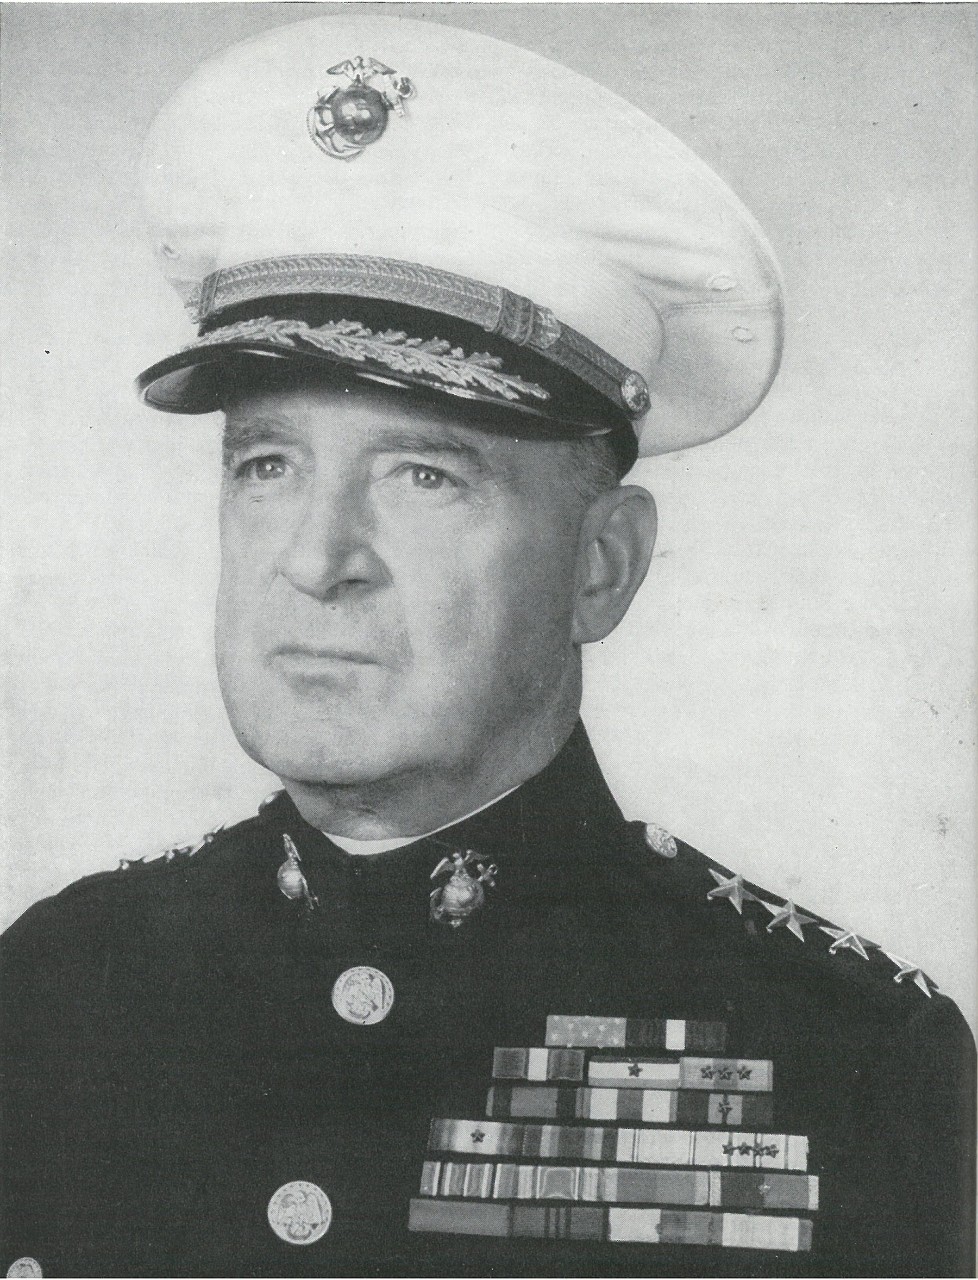 GEN A. A. VANDEGRIFT, eighteenth Commandant of the Marine Corps, who led Marines to victory on Guadalcanal as commander of the 1st Marine Division (reinforced).